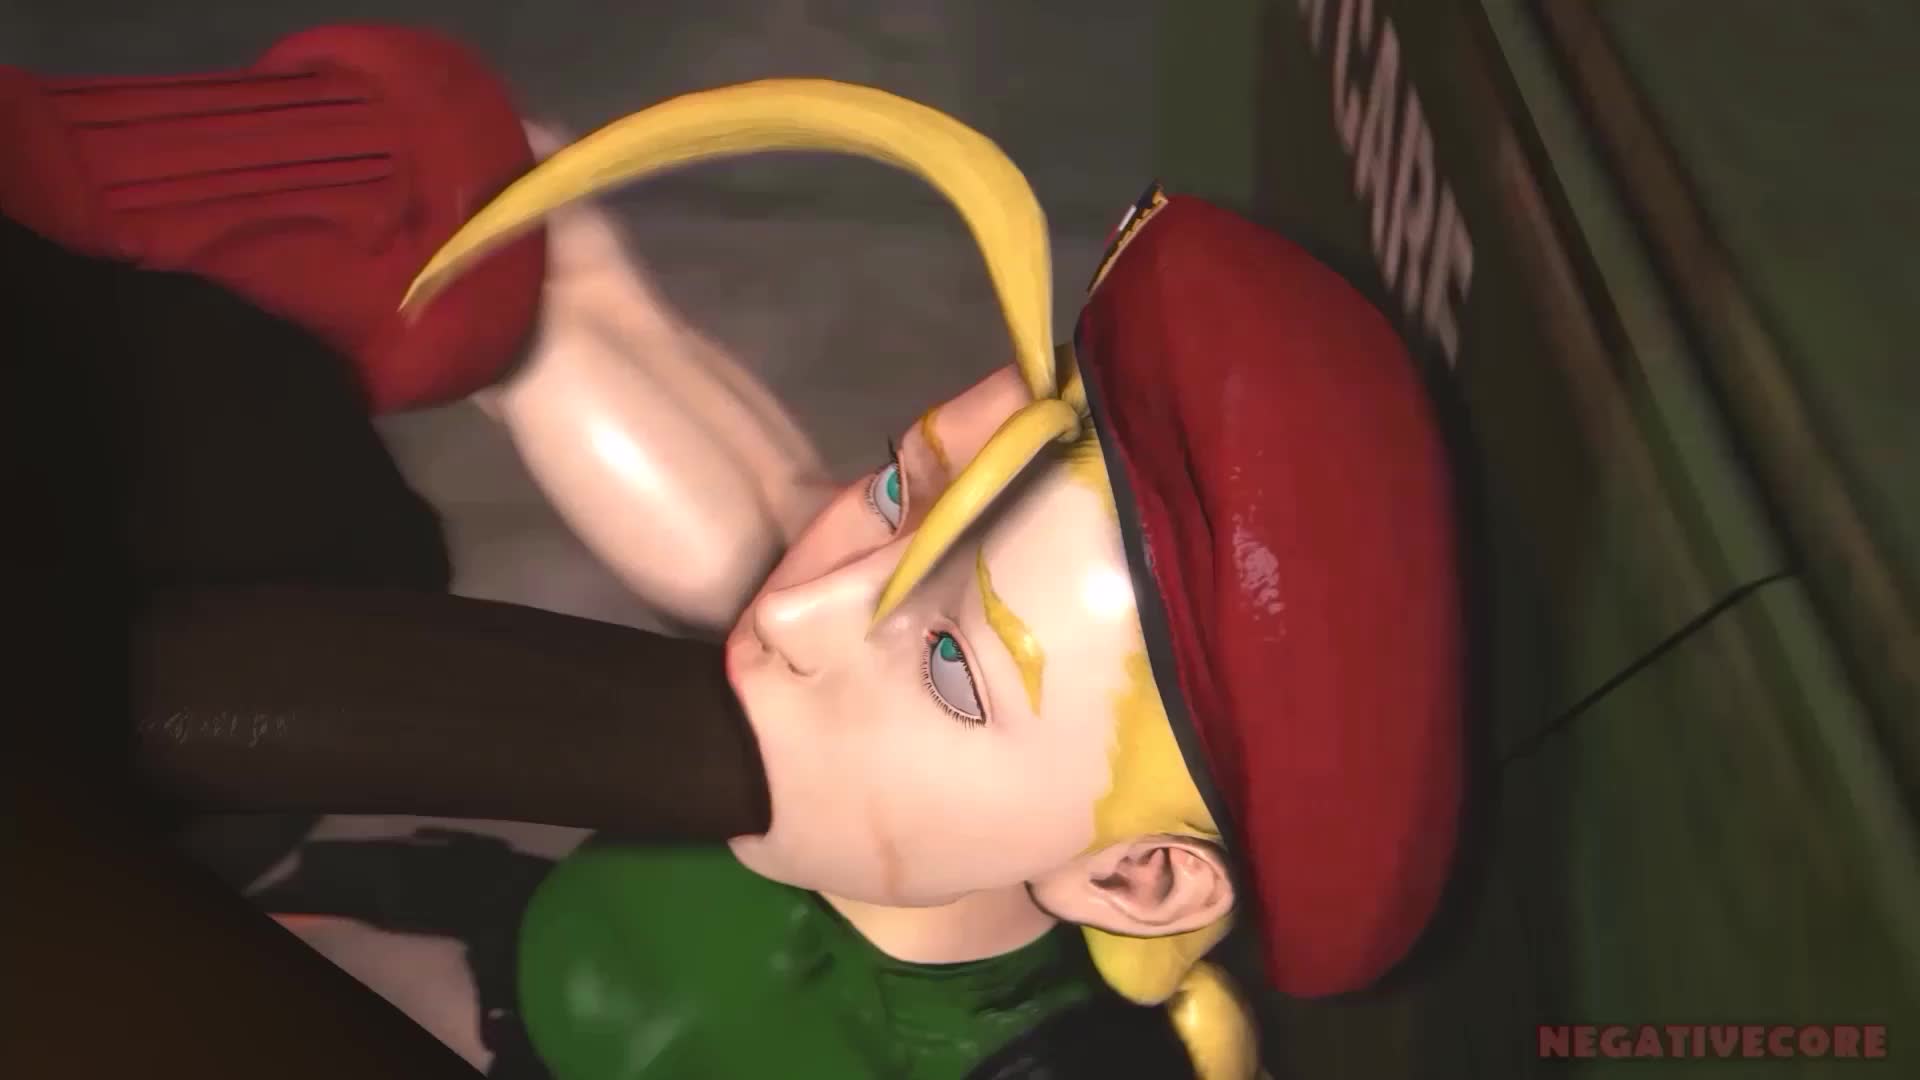 Cammy White Gives Deepthroat Blowjob To Huge Cock – Street Fighter NSFW animation thumbnail